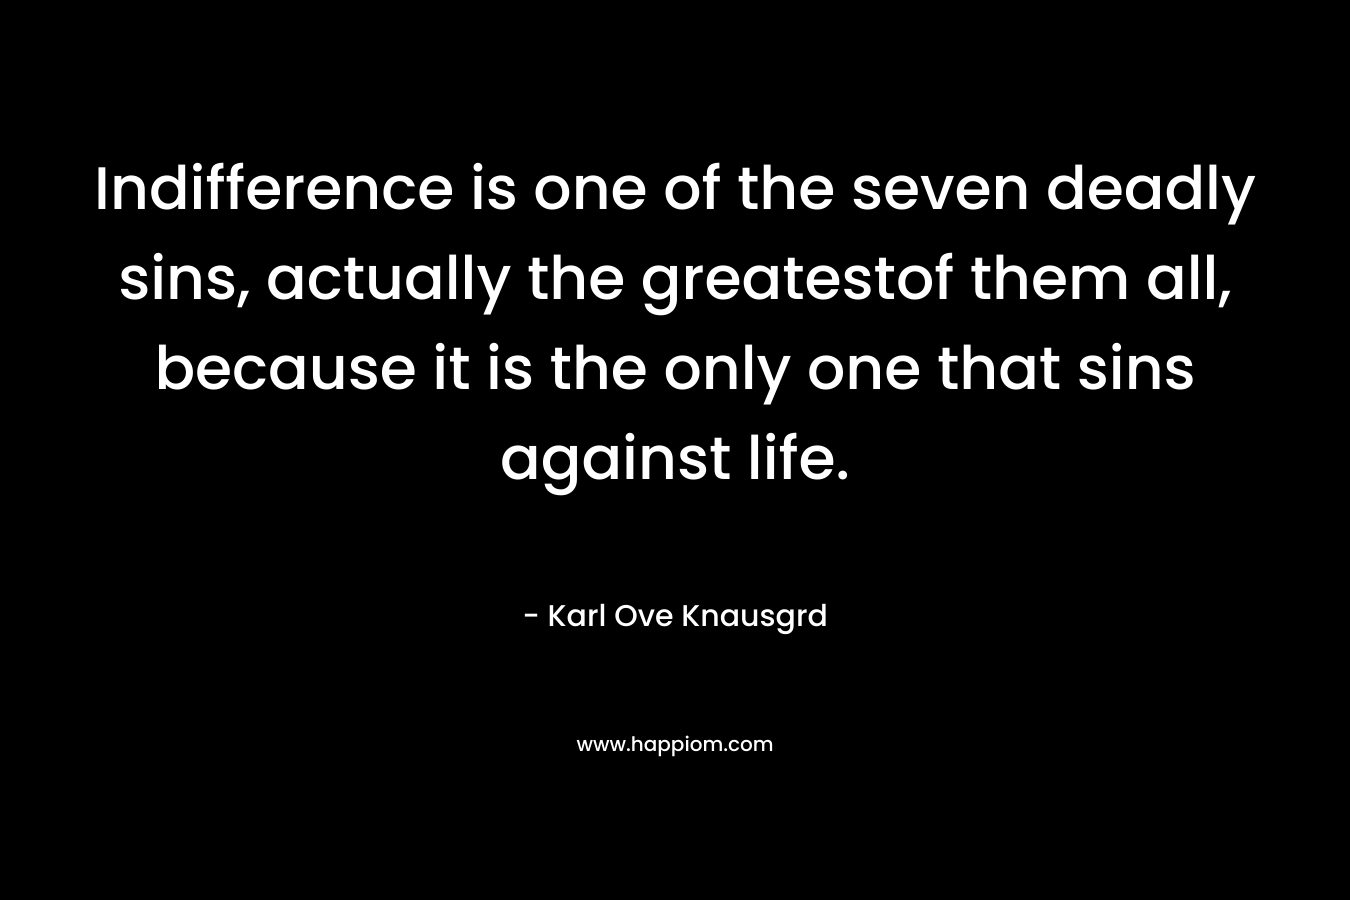 Indifference is one of the seven deadly sins, actually the greatestof them all, because it is the only one that sins against life.